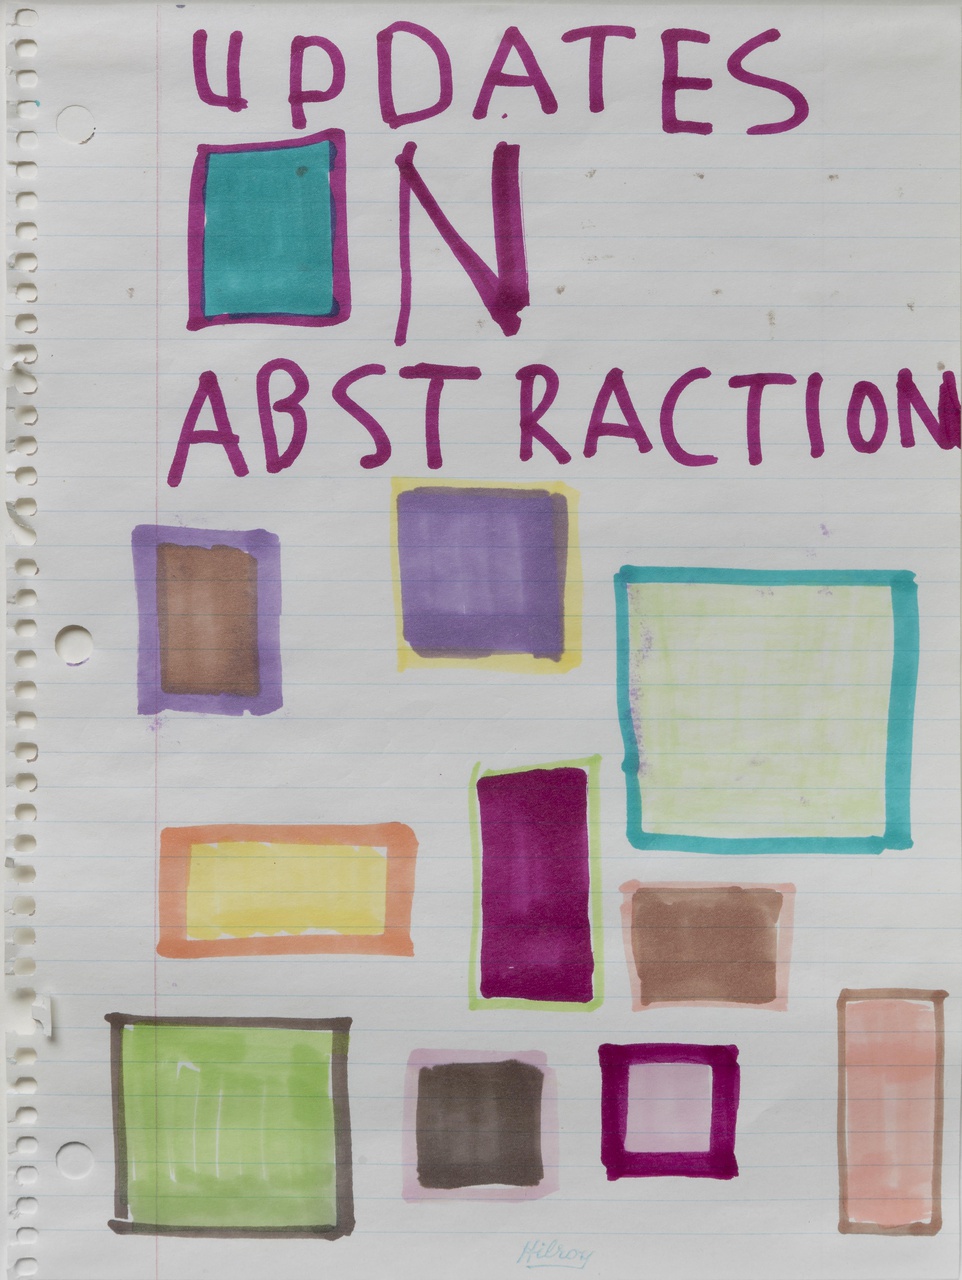 Untitled (Updates on abstraction)